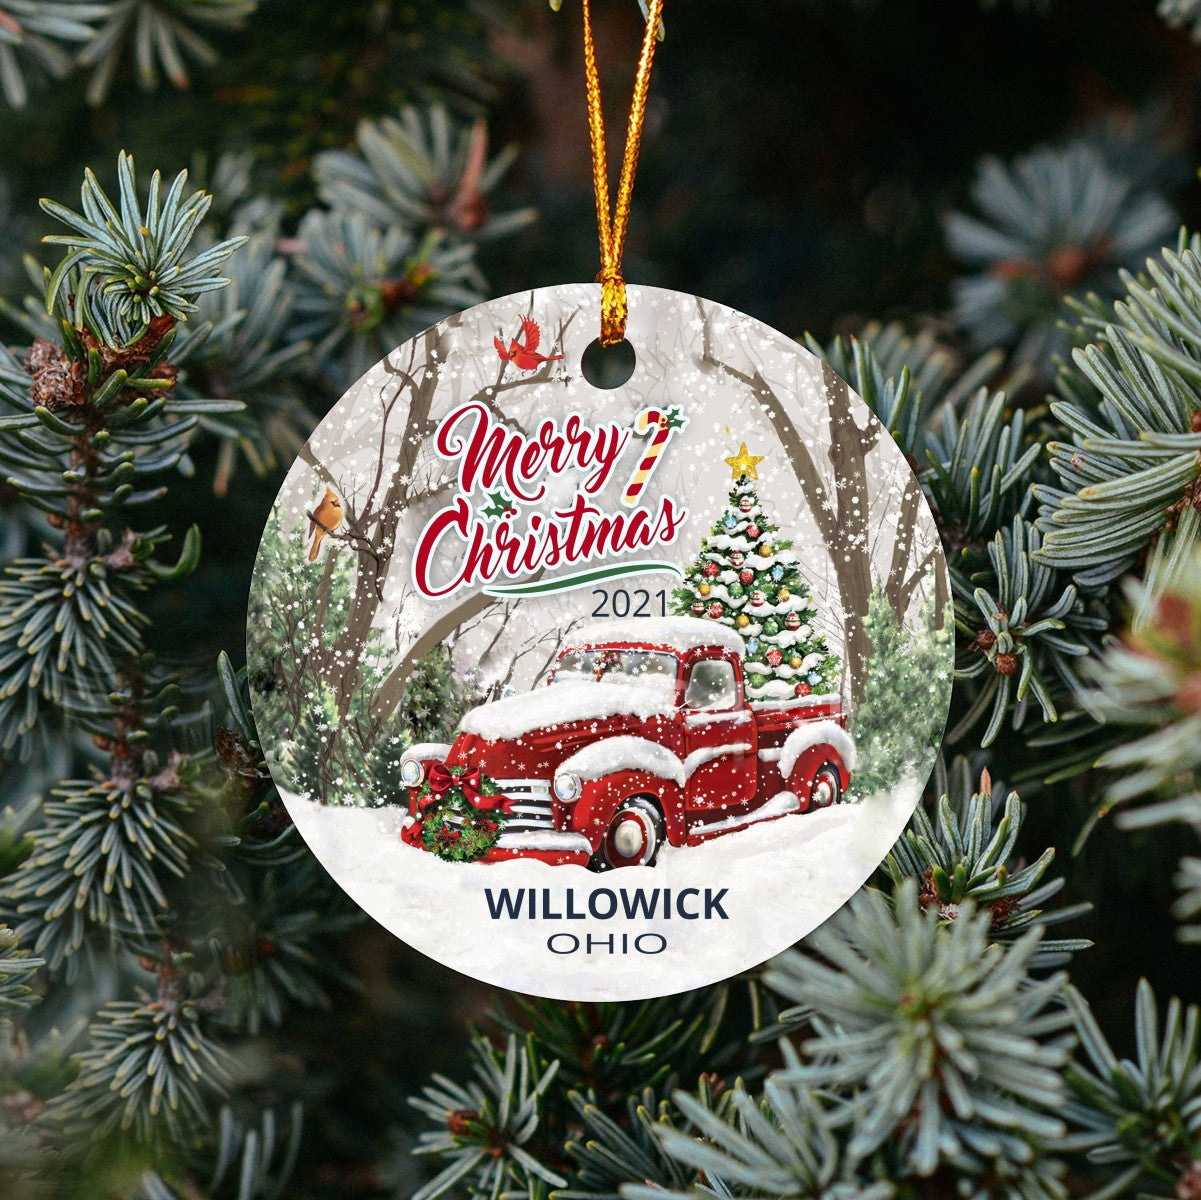 Christmas Tree Ornaments Willowick - Ornament With Name City, State Willowick Ohio OH Ornament - Red Truck Xmas Ornaments 3'' Plastic Gift For Family, Friend And Housewarming